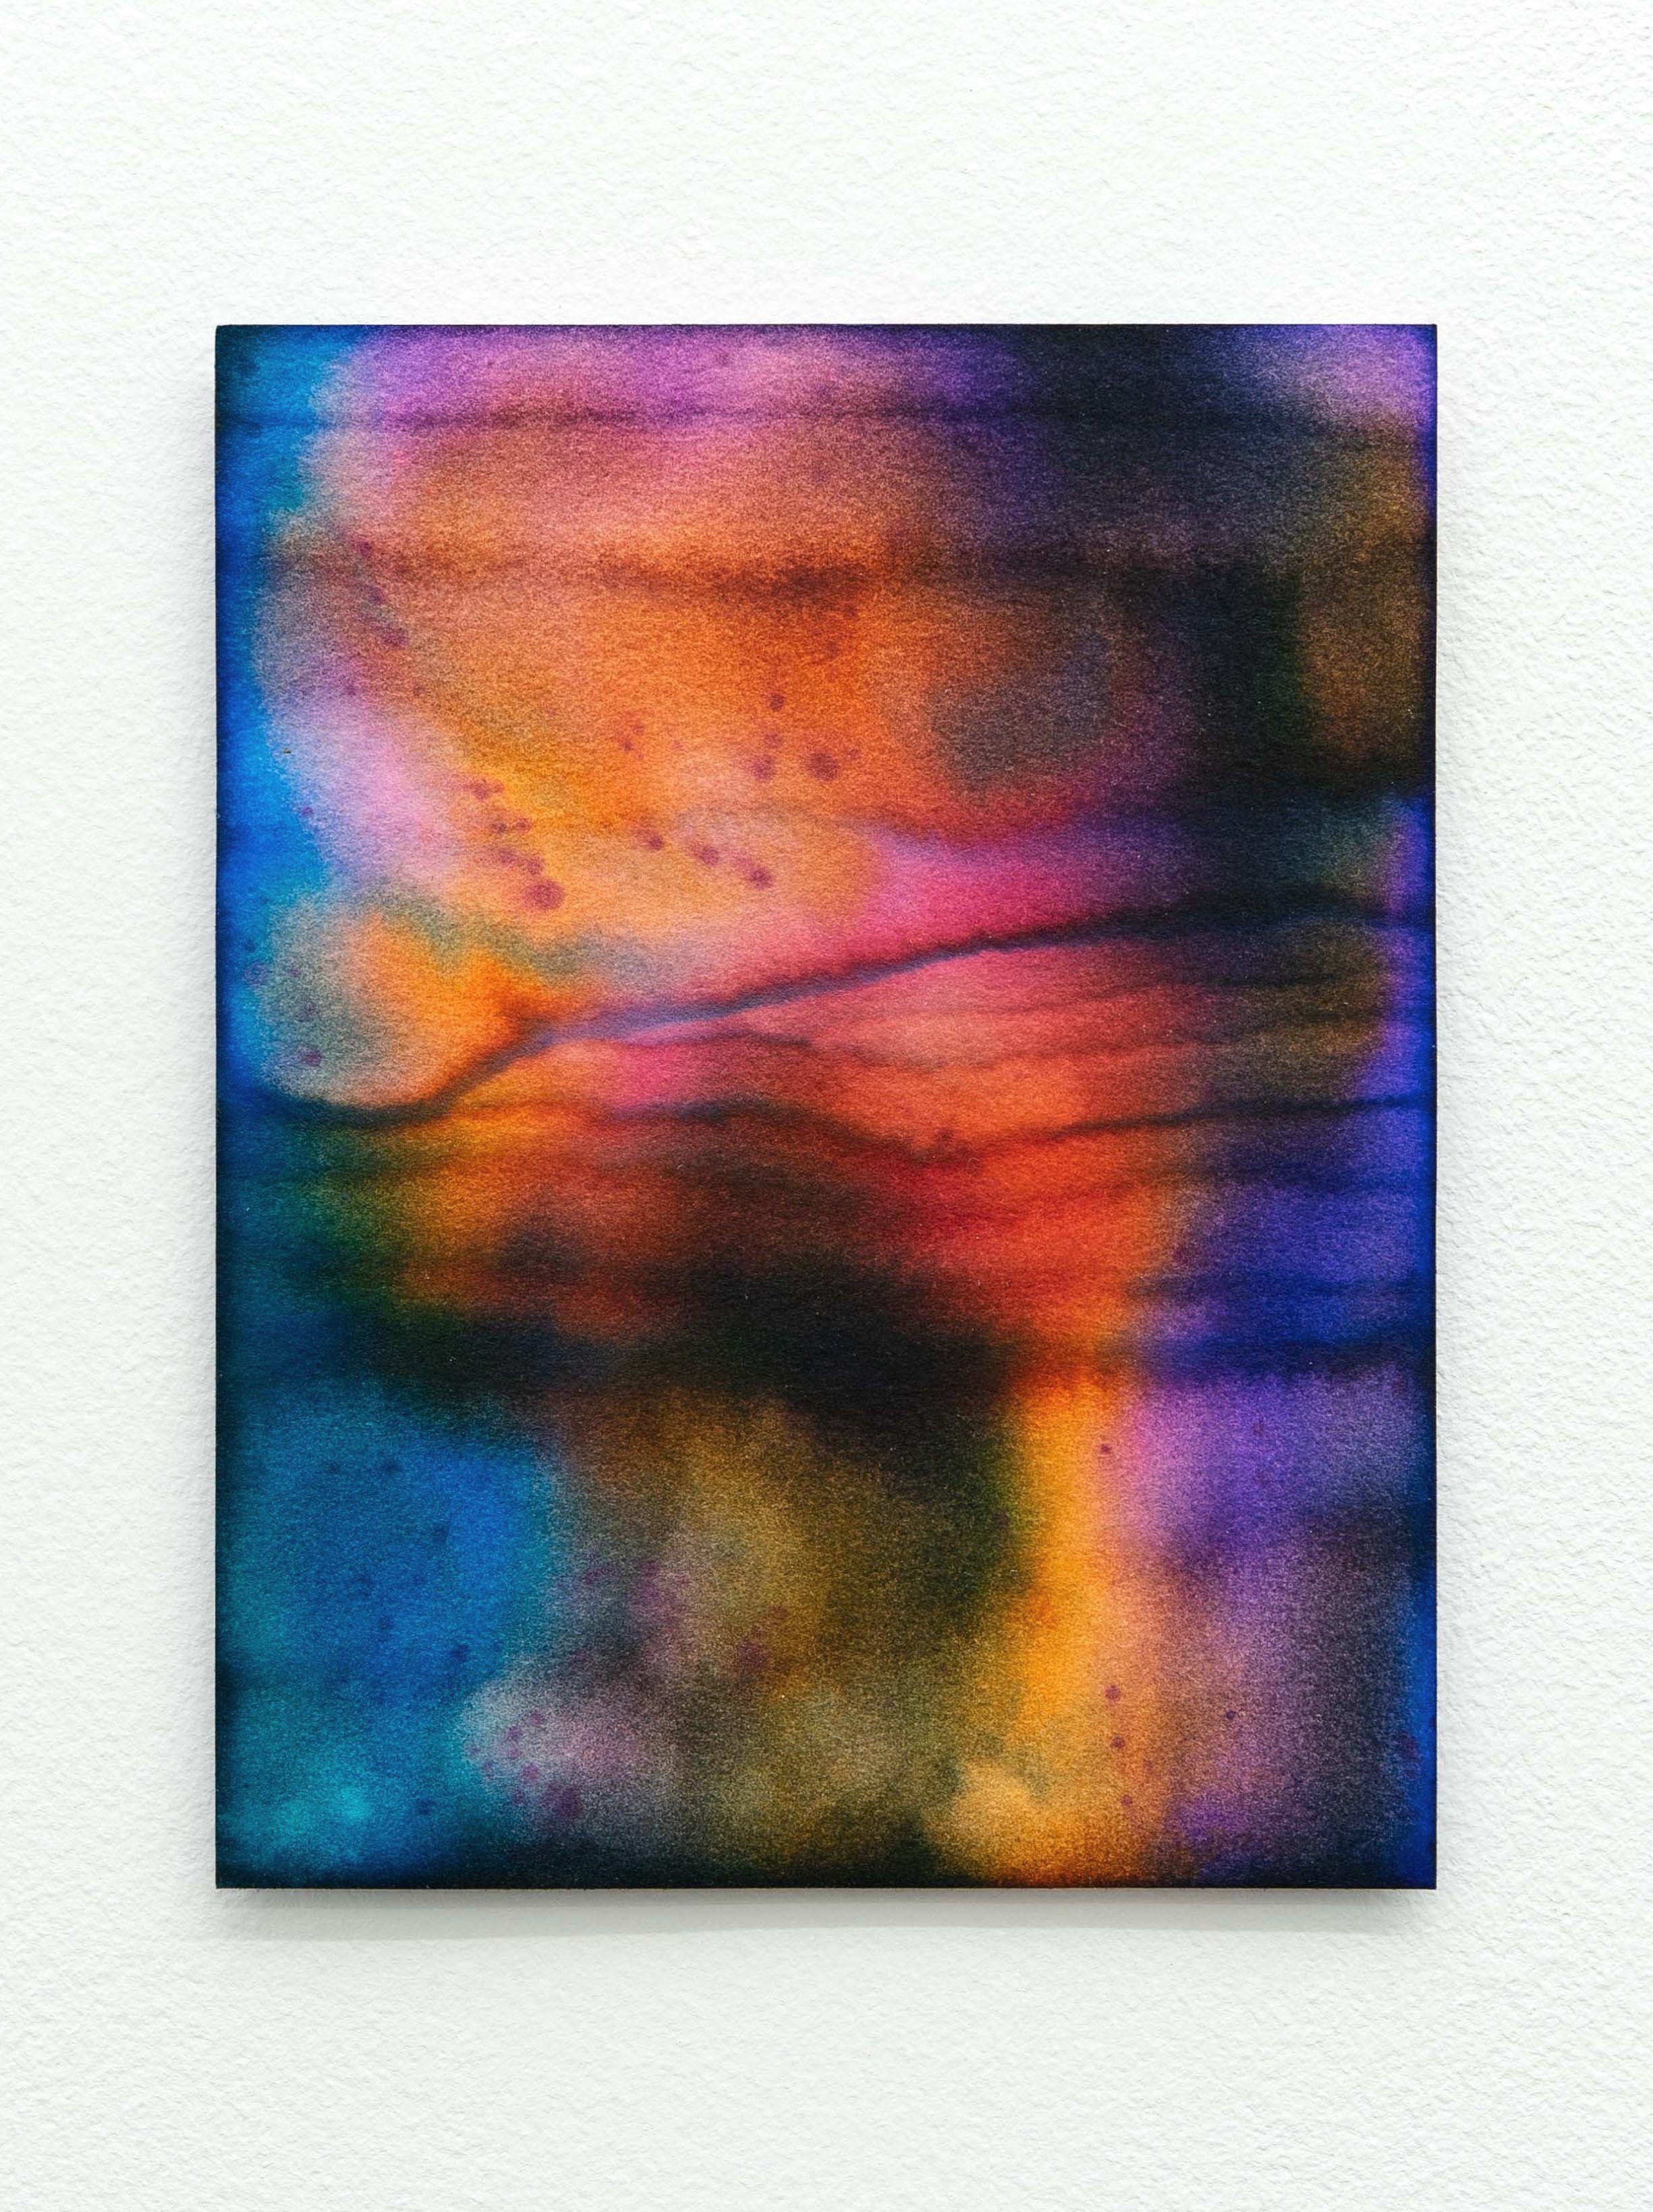  January 3 2020 (Pink Cloud), 2023, ink on chromatography paper soaked in Marijuana solution, 4.3 x 5.5 inches 